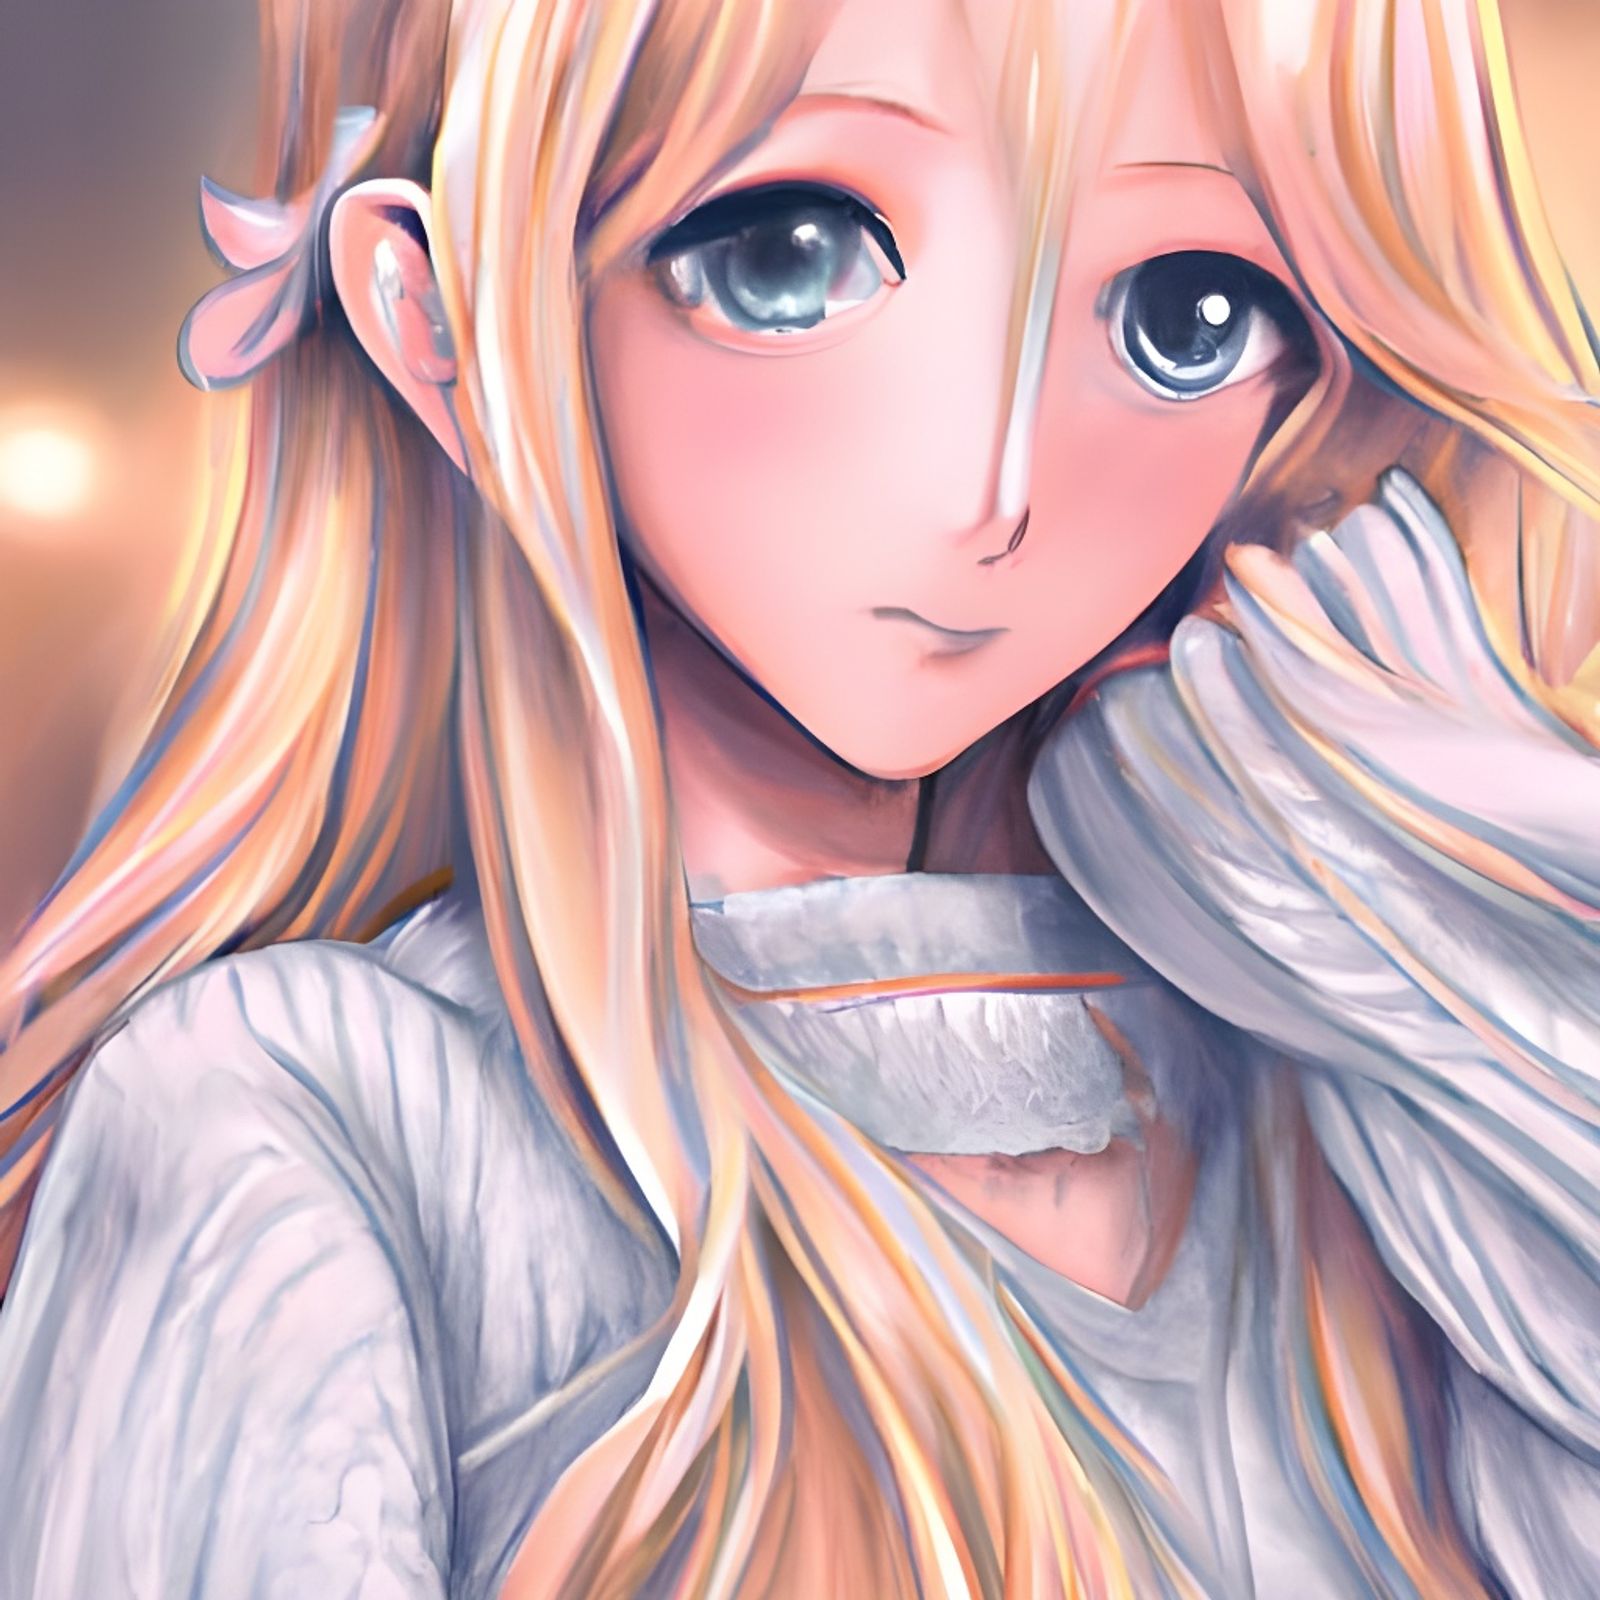 sad anime girl with blonde hair and blue eyes